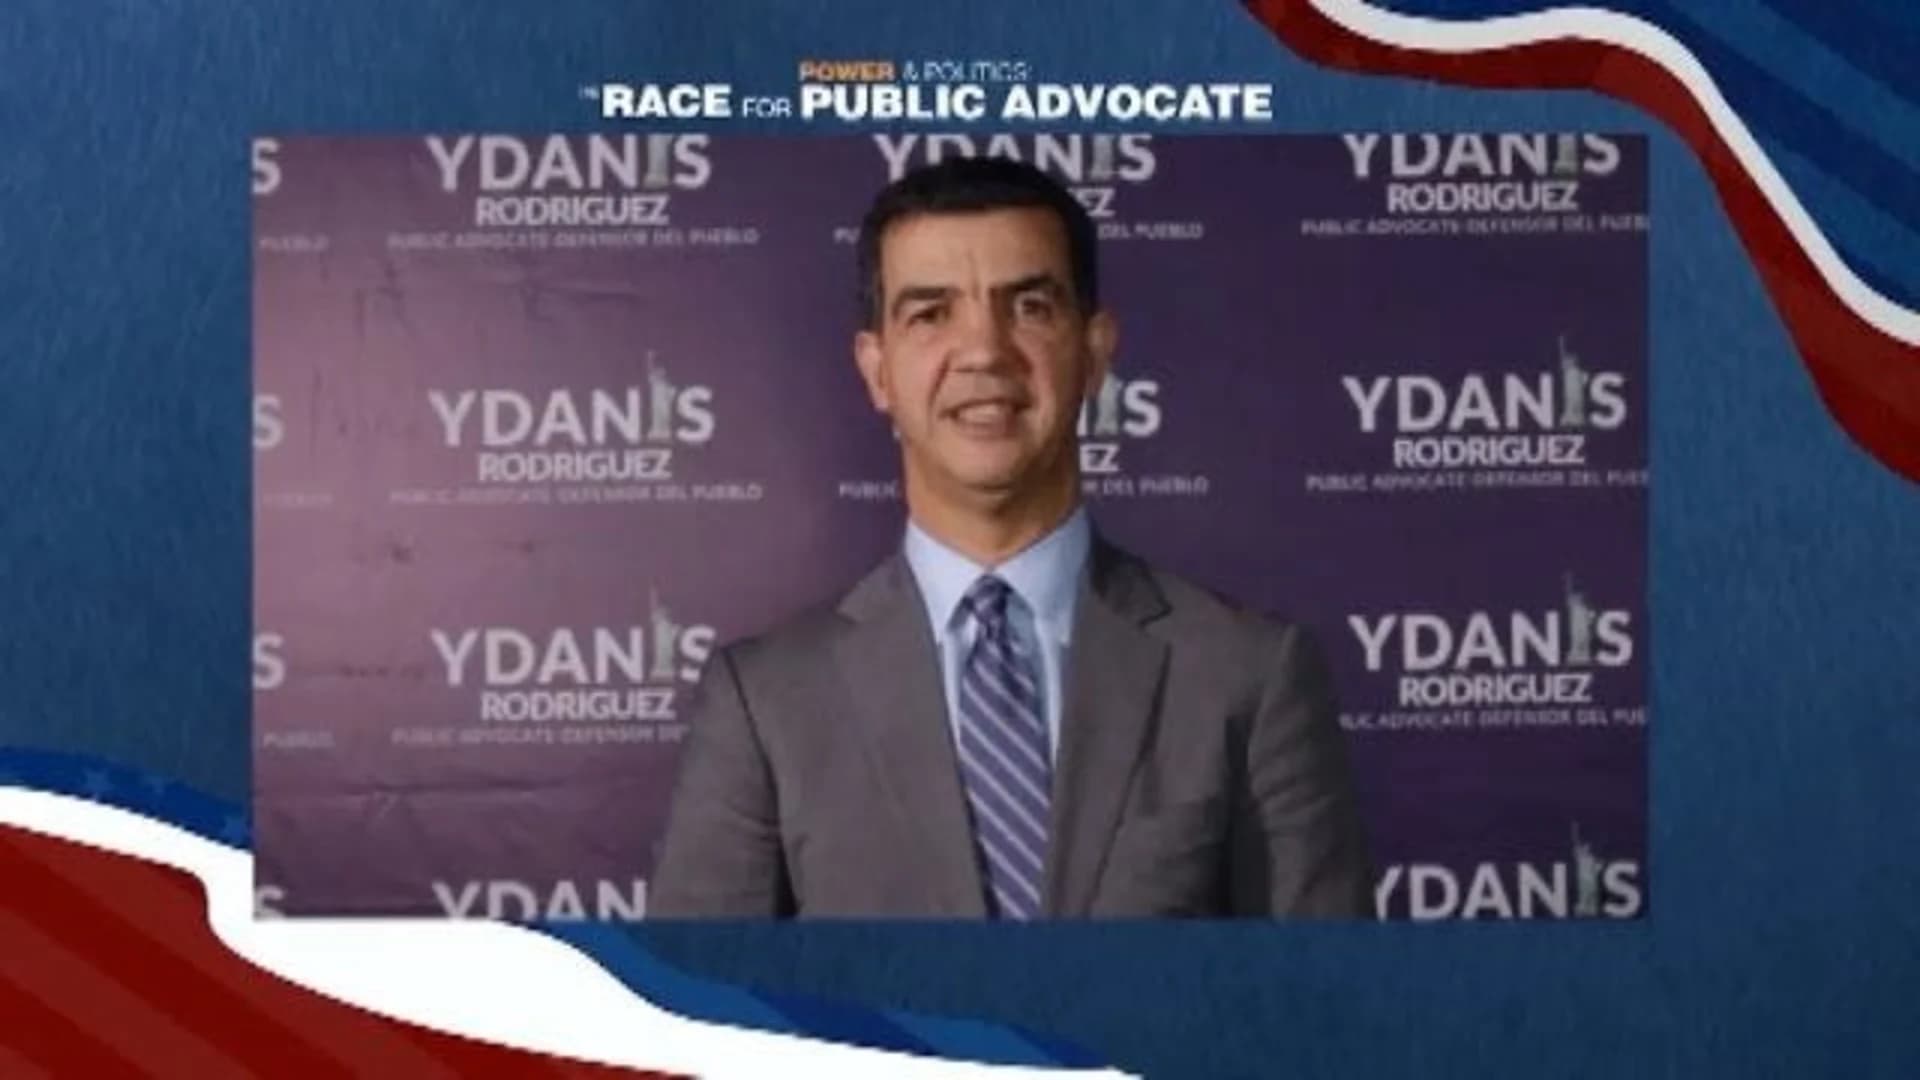 Ydanis Rodriguez - United for Immigrants